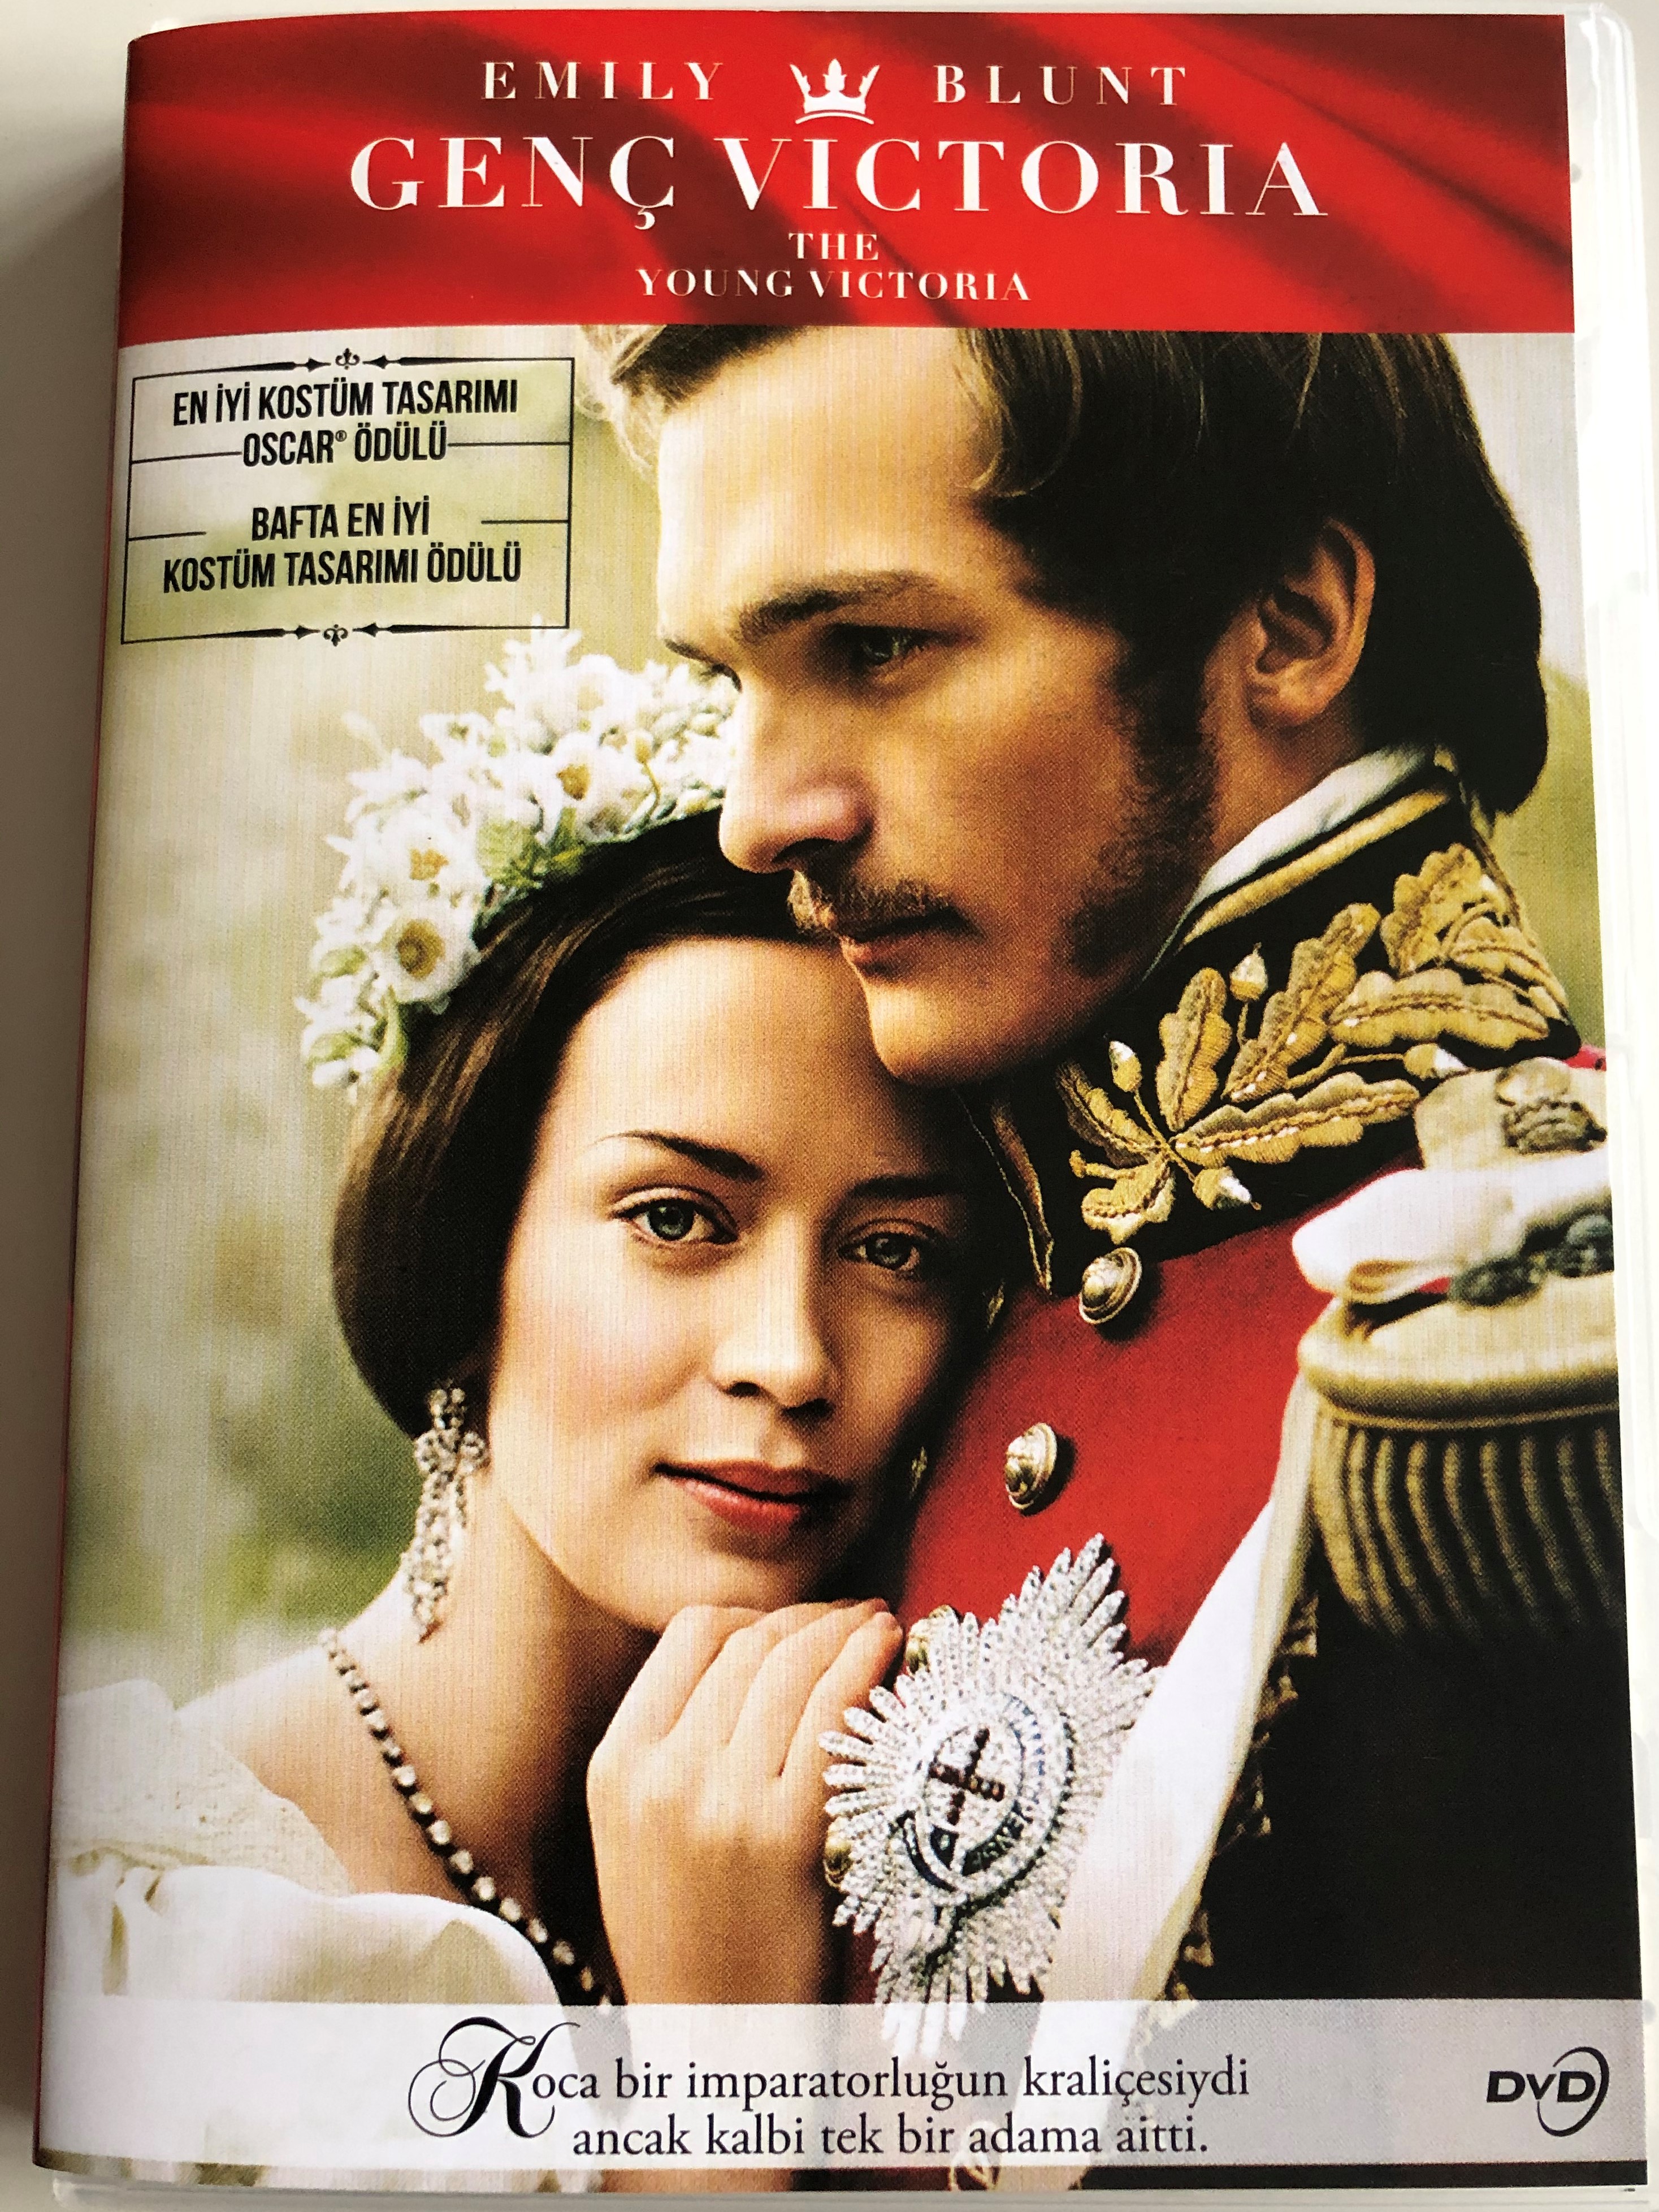 the-young-victoria-dvd-2009-gen-victoria-directed-by-jean-marc-vall-e-1.jpg